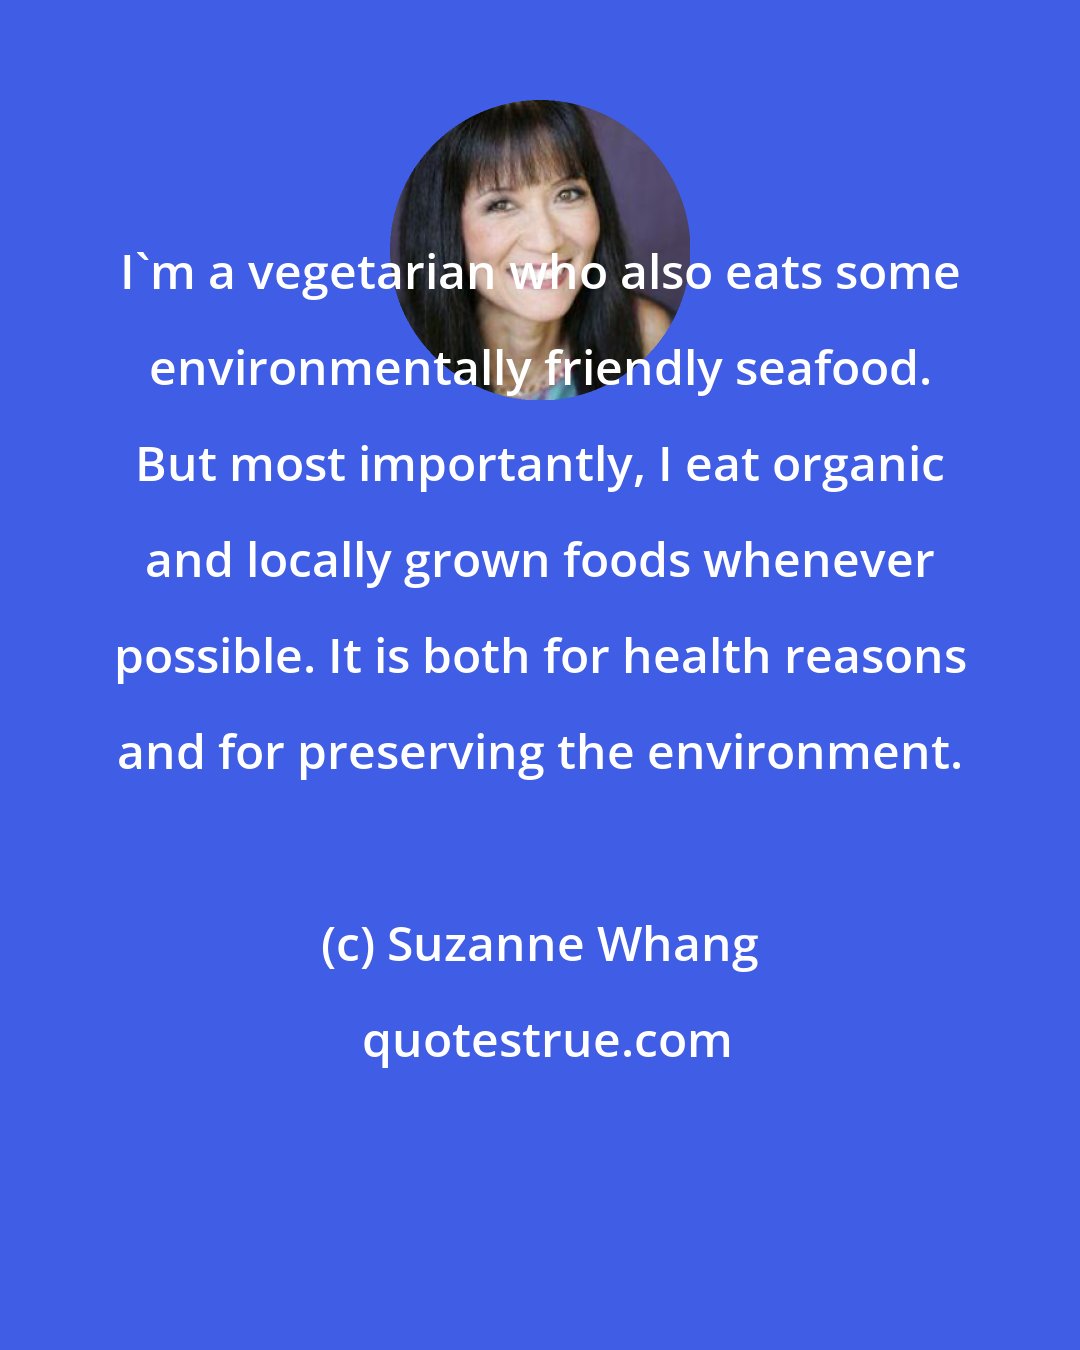 Suzanne Whang: I'm a vegetarian who also eats some environmentally friendly seafood. But most importantly, I eat organic and locally grown foods whenever possible. It is both for health reasons and for preserving the environment.